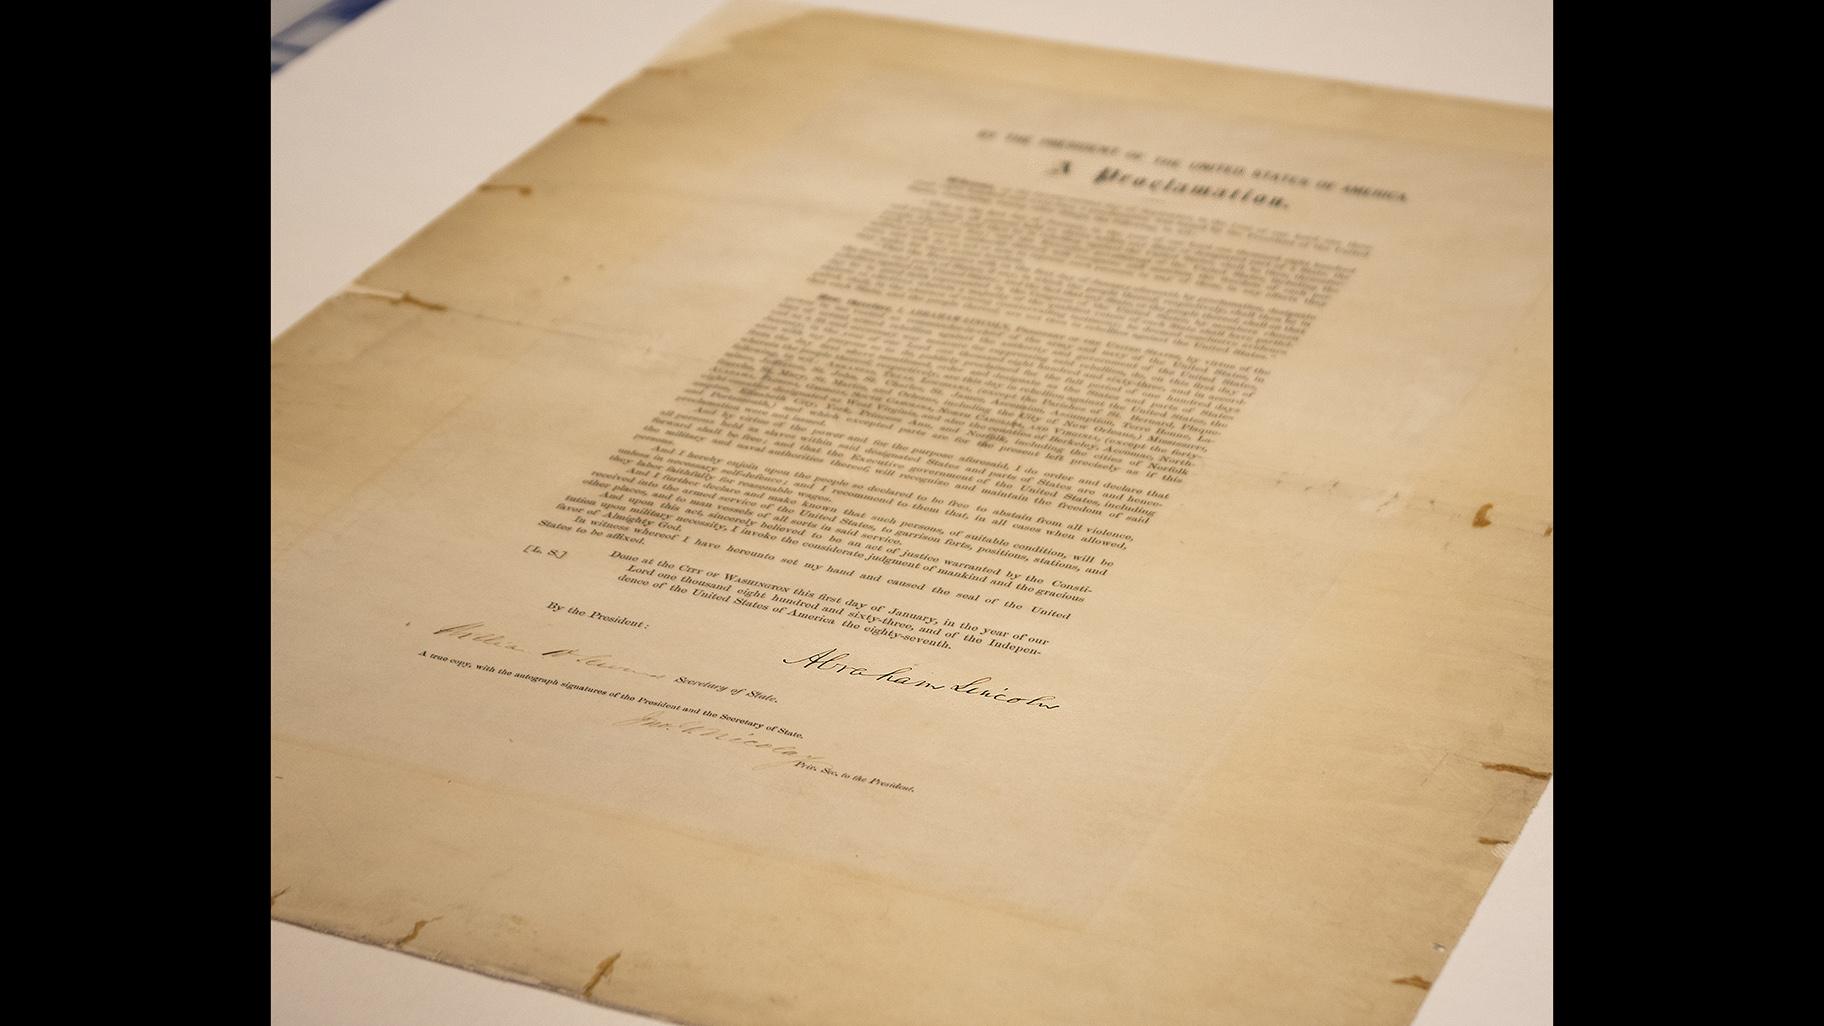 This updated handout photo provided by the Abraham Lincoln Presidential Library and Museum on Tuesday, June 8, 2021, shows a signed copy of Emancipation Proclamation. (Abraham Lincoln Presidential Library and Museum photo via AP, File)